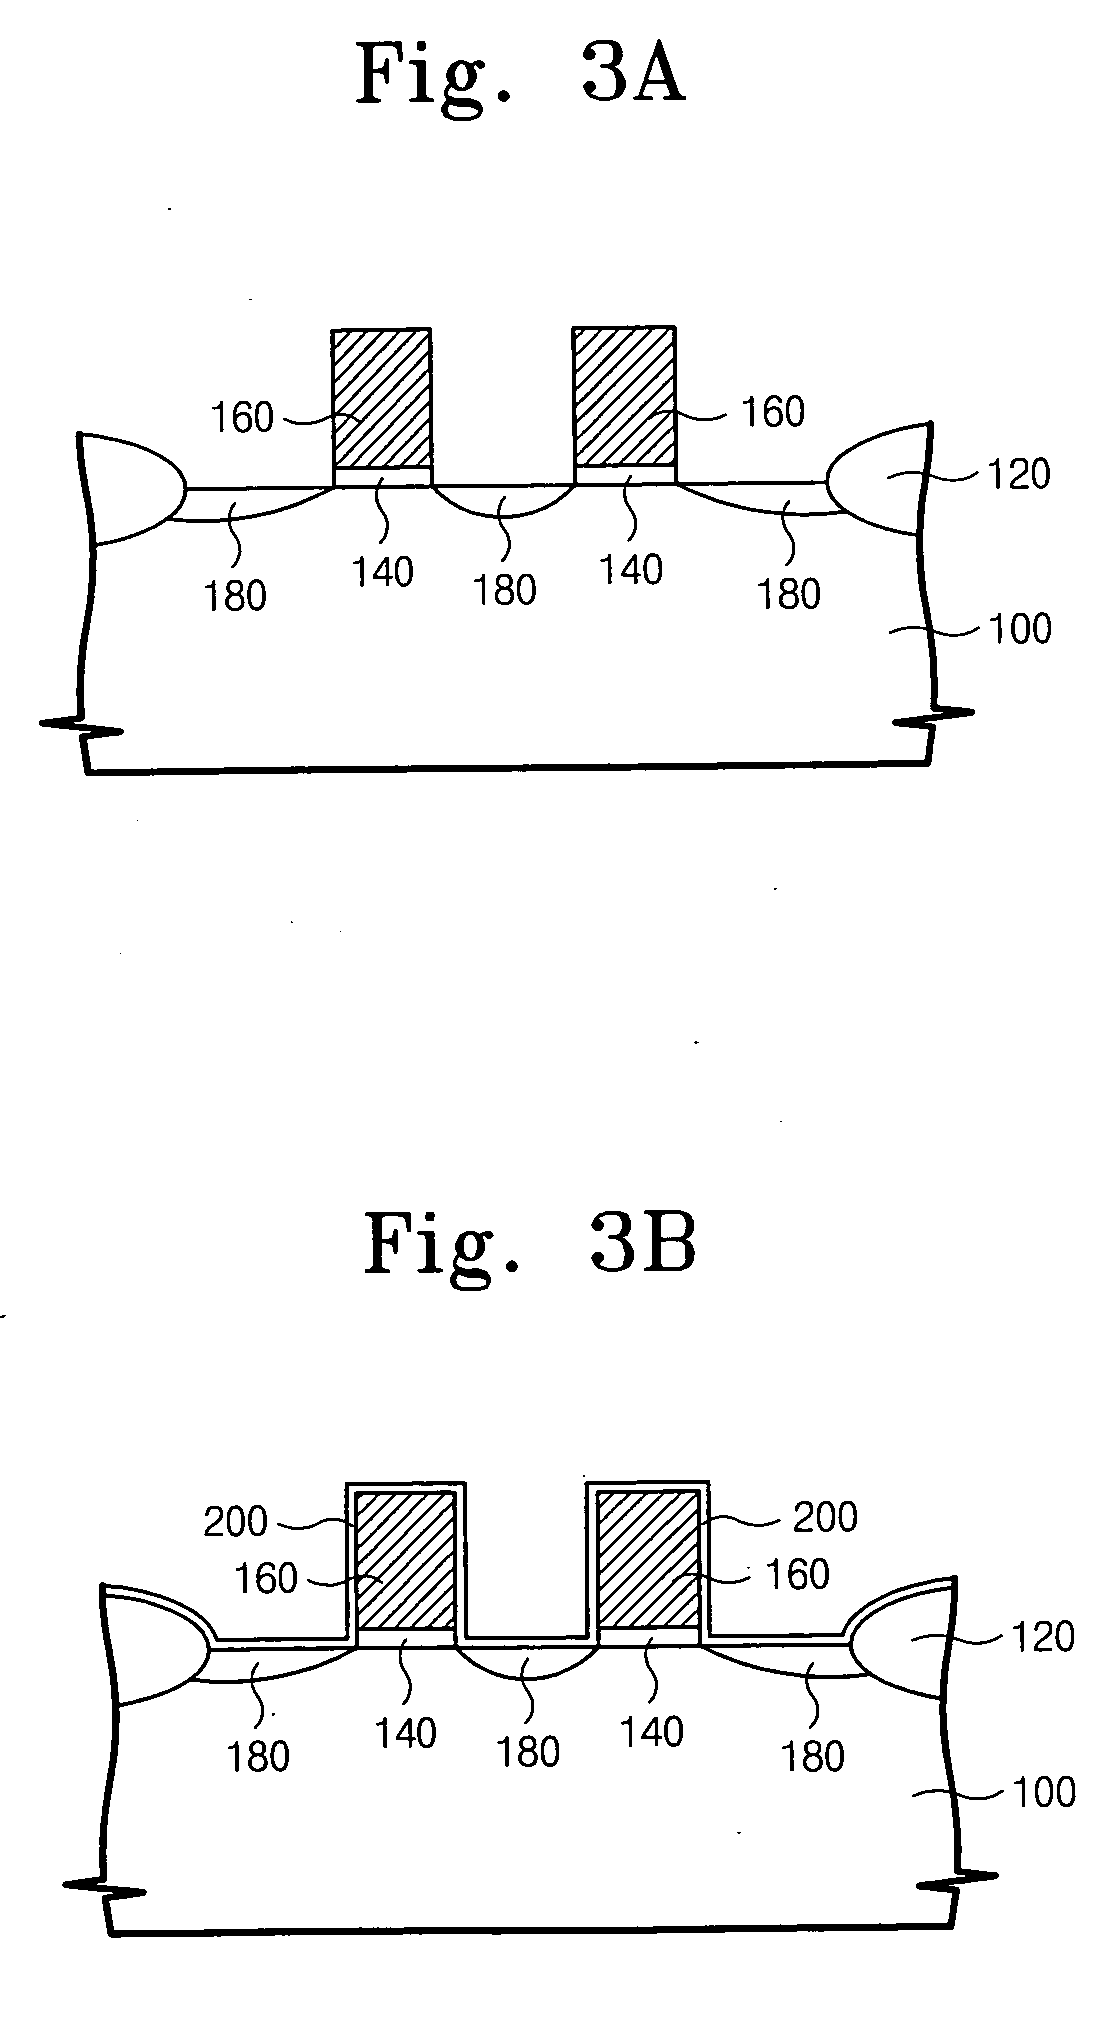 Self-aligned semiconductor contact structures and methods for fabricating the same